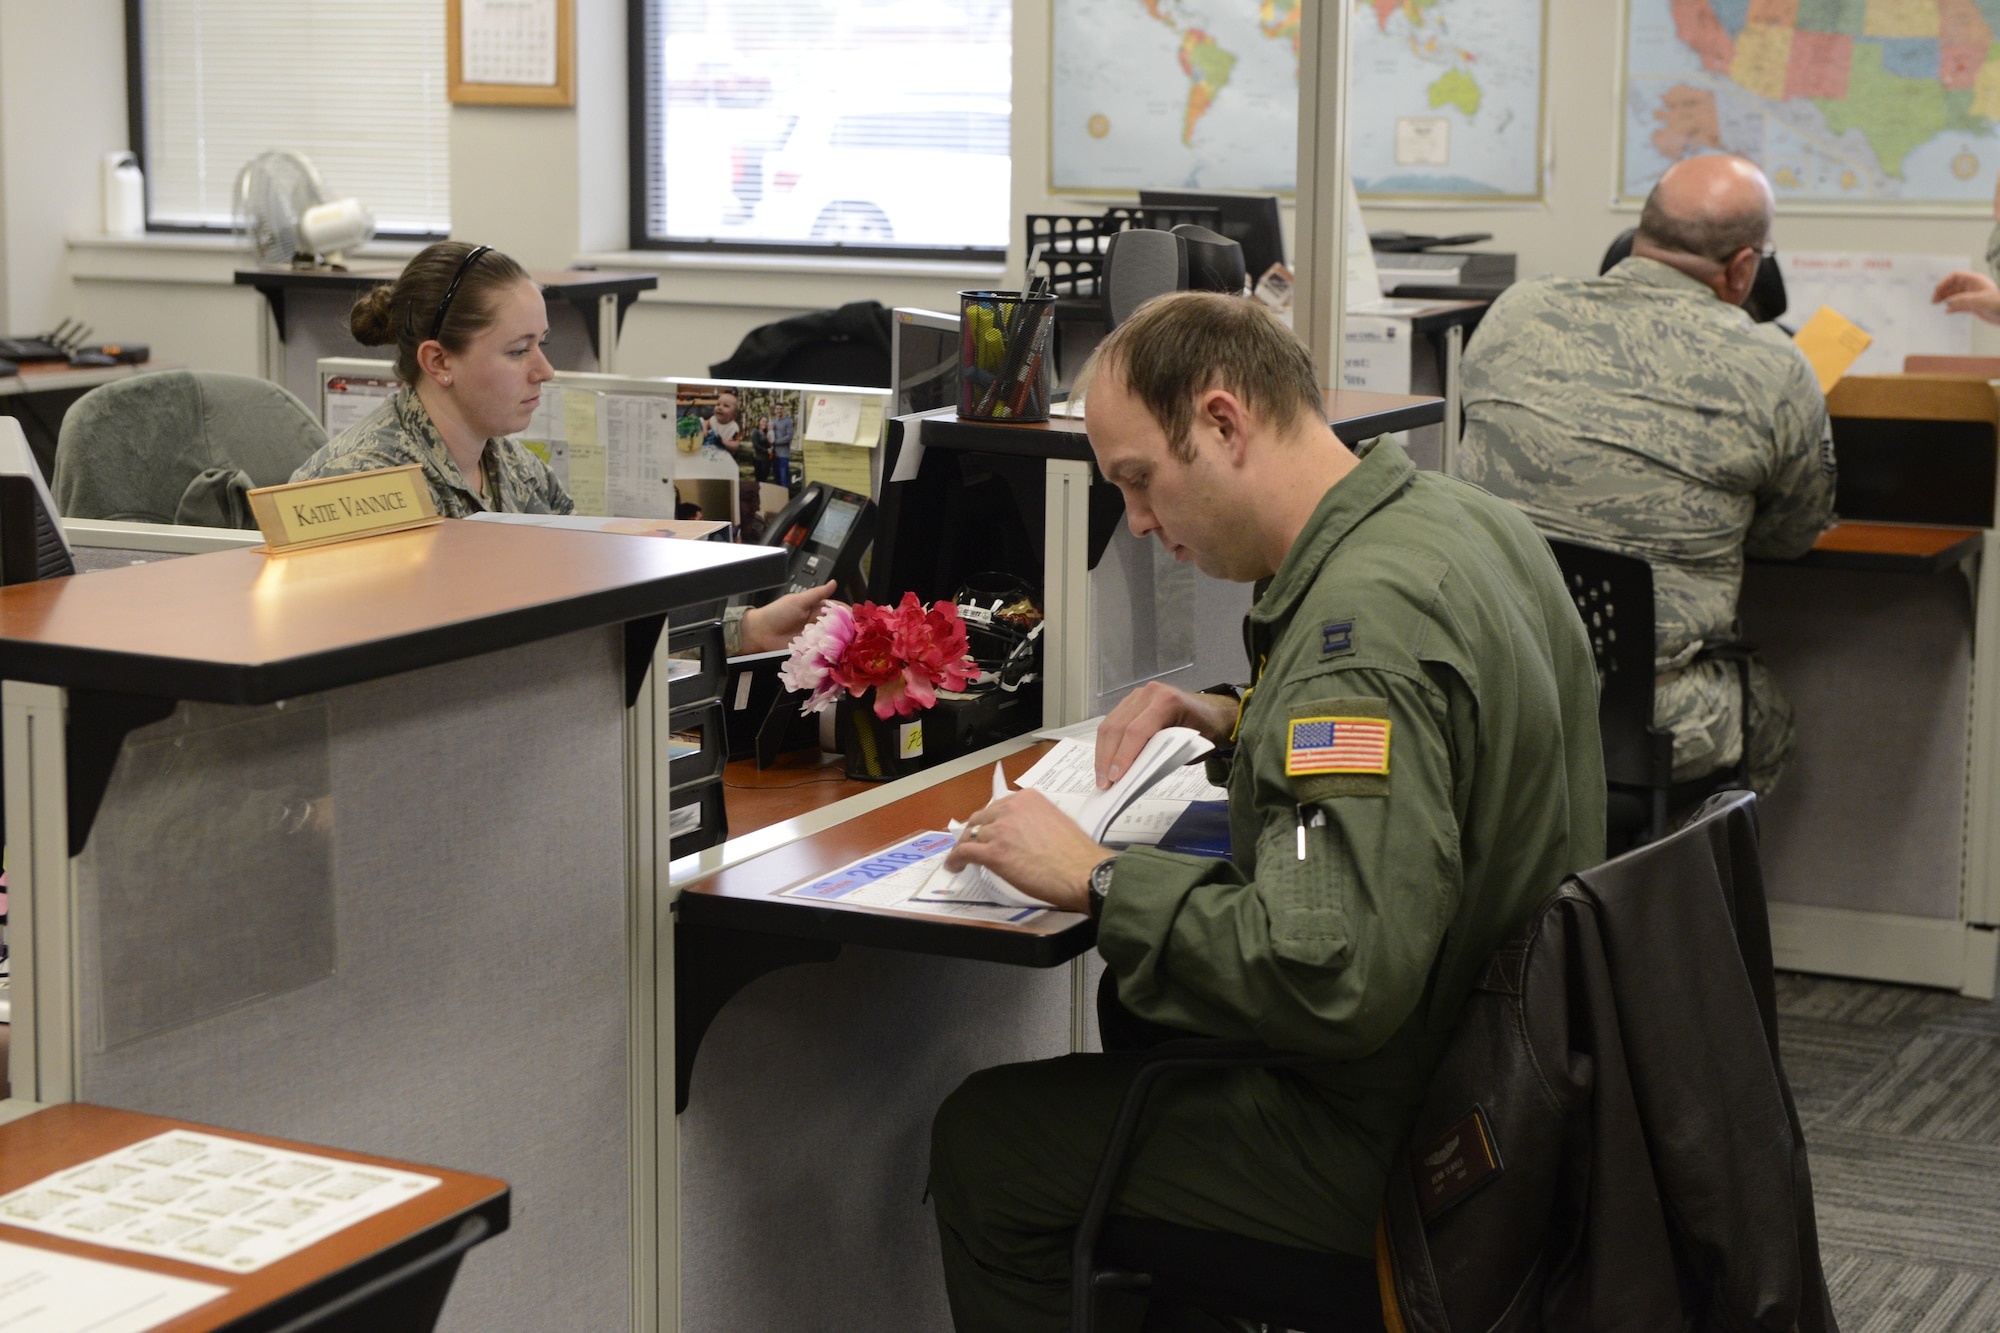 One female airman sits at a desk across from a male airman in a flight suit looking through a folder of paperwork.